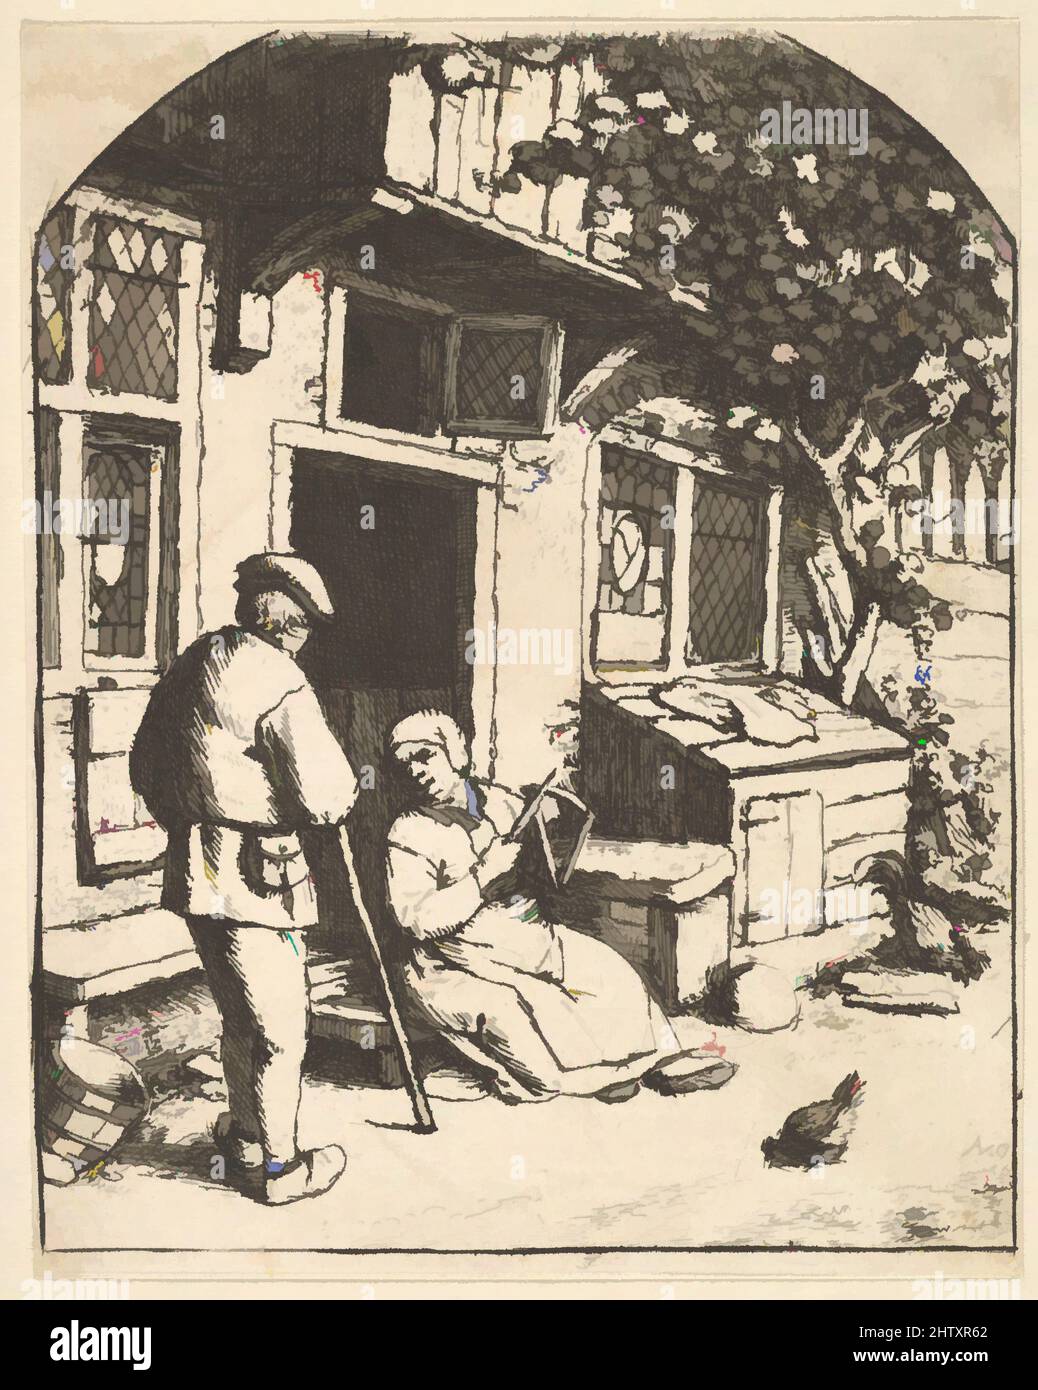 Art inspired by The Winder, 1610–85, Etching, sheet: 3 13/16 x 3 in. (9.7 x 7.6 cm), Prints, Adriaen van Ostade (Dutch, Haarlem 1610–1685 Haarlem, Classic works modernized by Artotop with a splash of modernity. Shapes, color and value, eye-catching visual impact on art. Emotions through freedom of artworks in a contemporary way. A timeless message pursuing a wildly creative new direction. Artists turning to the digital medium and creating the Artotop NFT Stock Photo